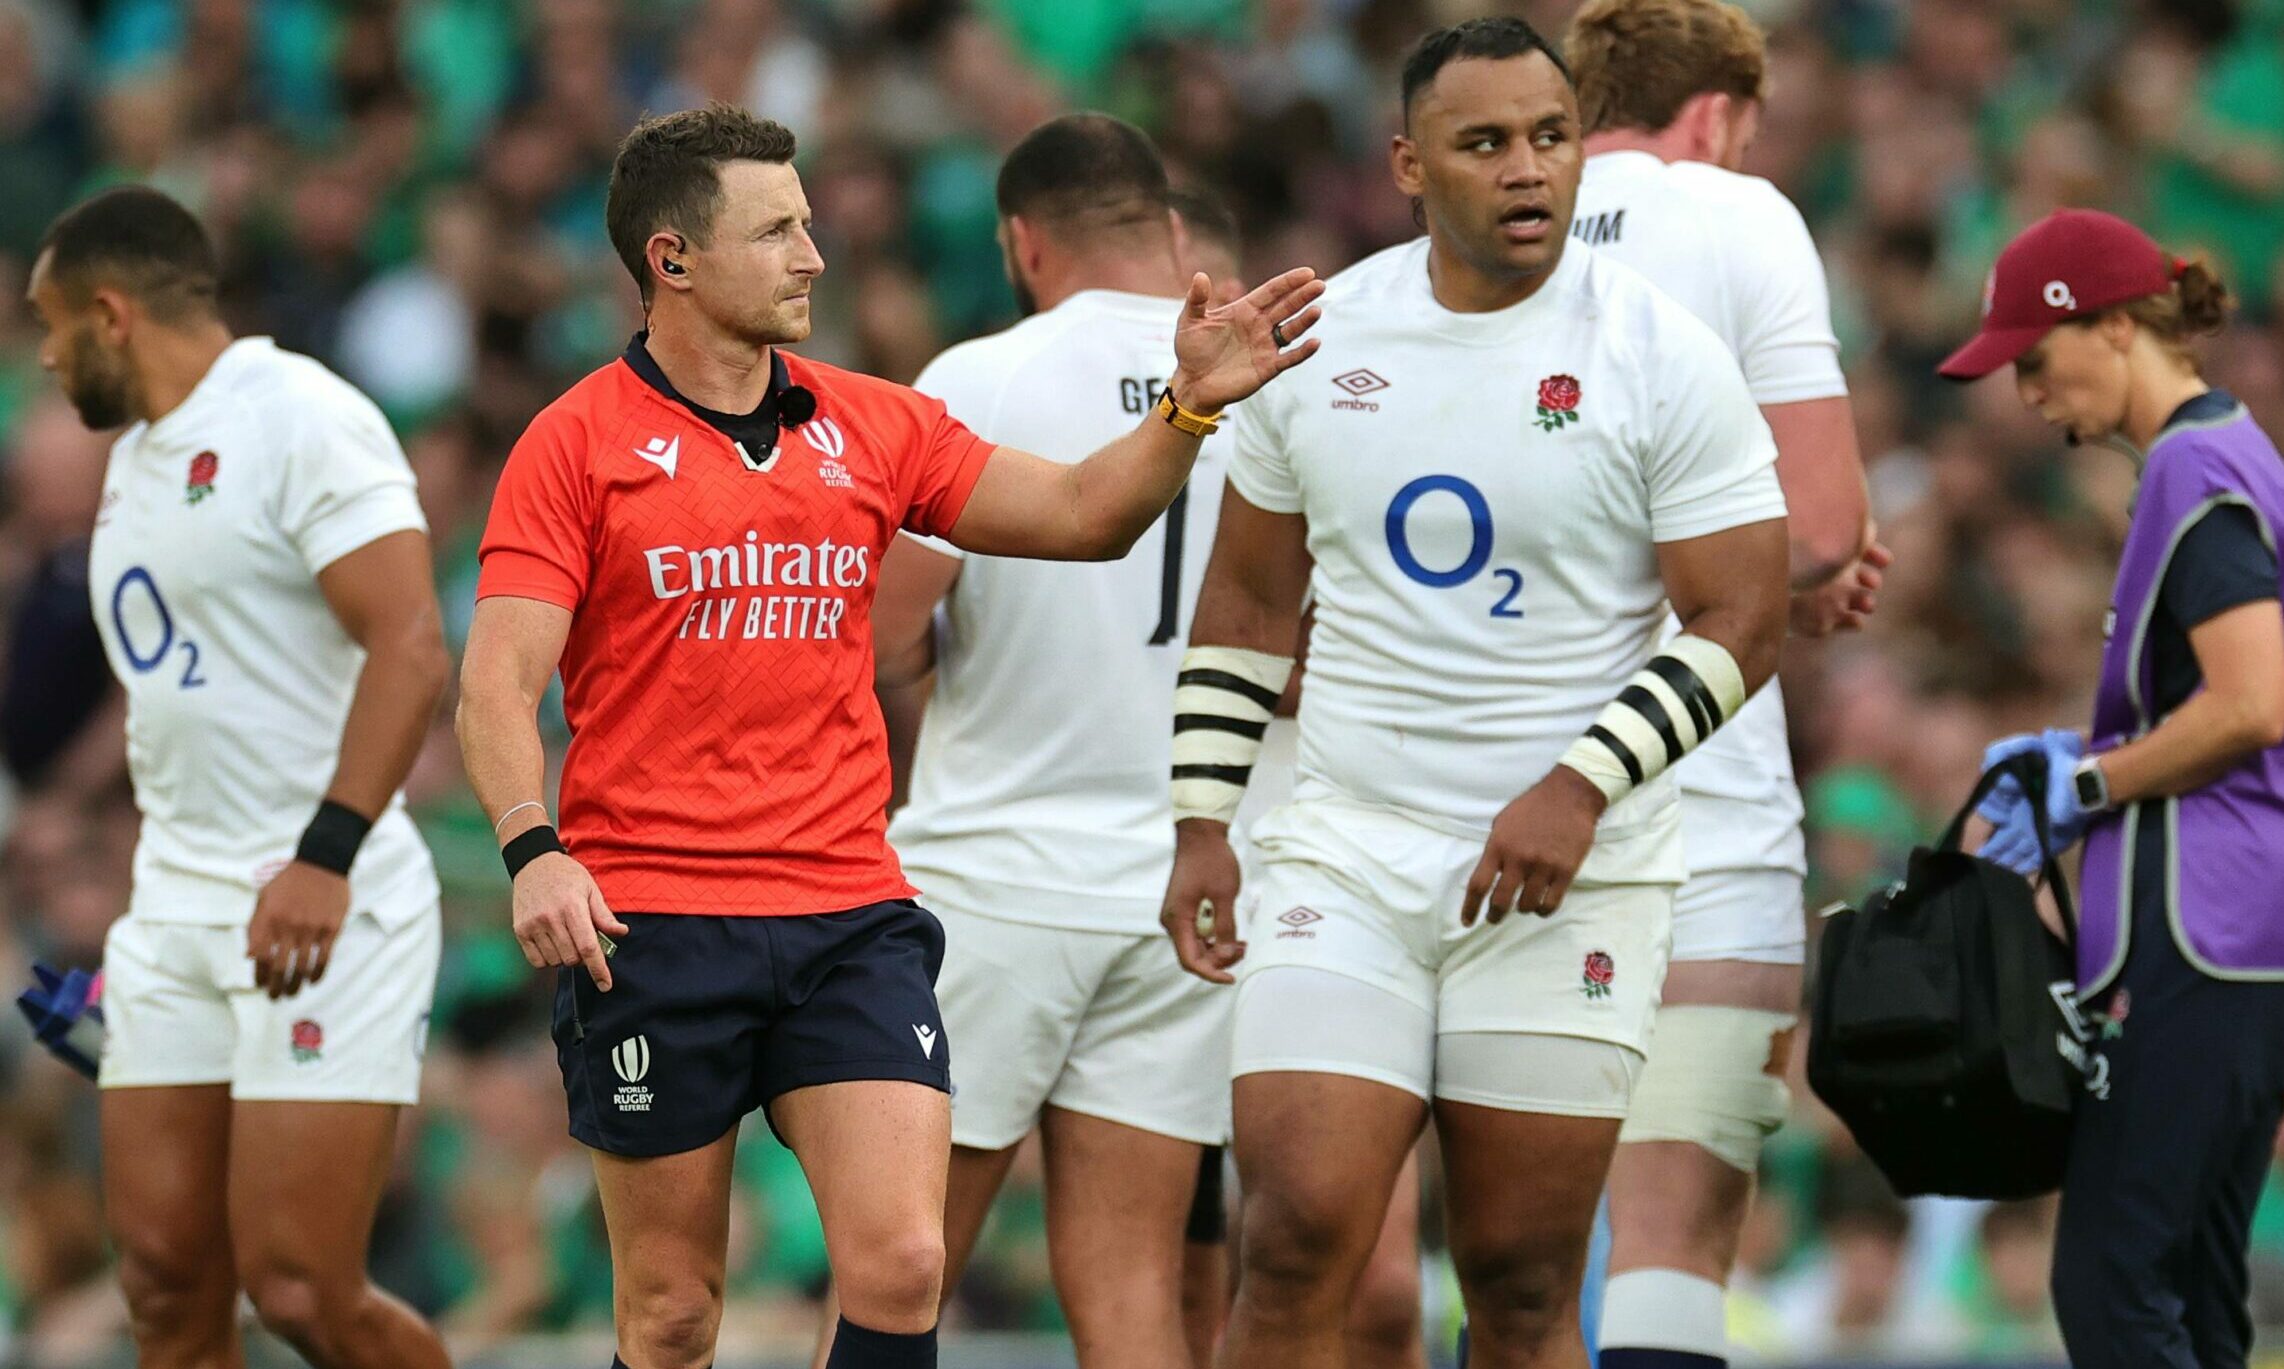 Billy Vunipola of England looks on before being shown a yellow card.